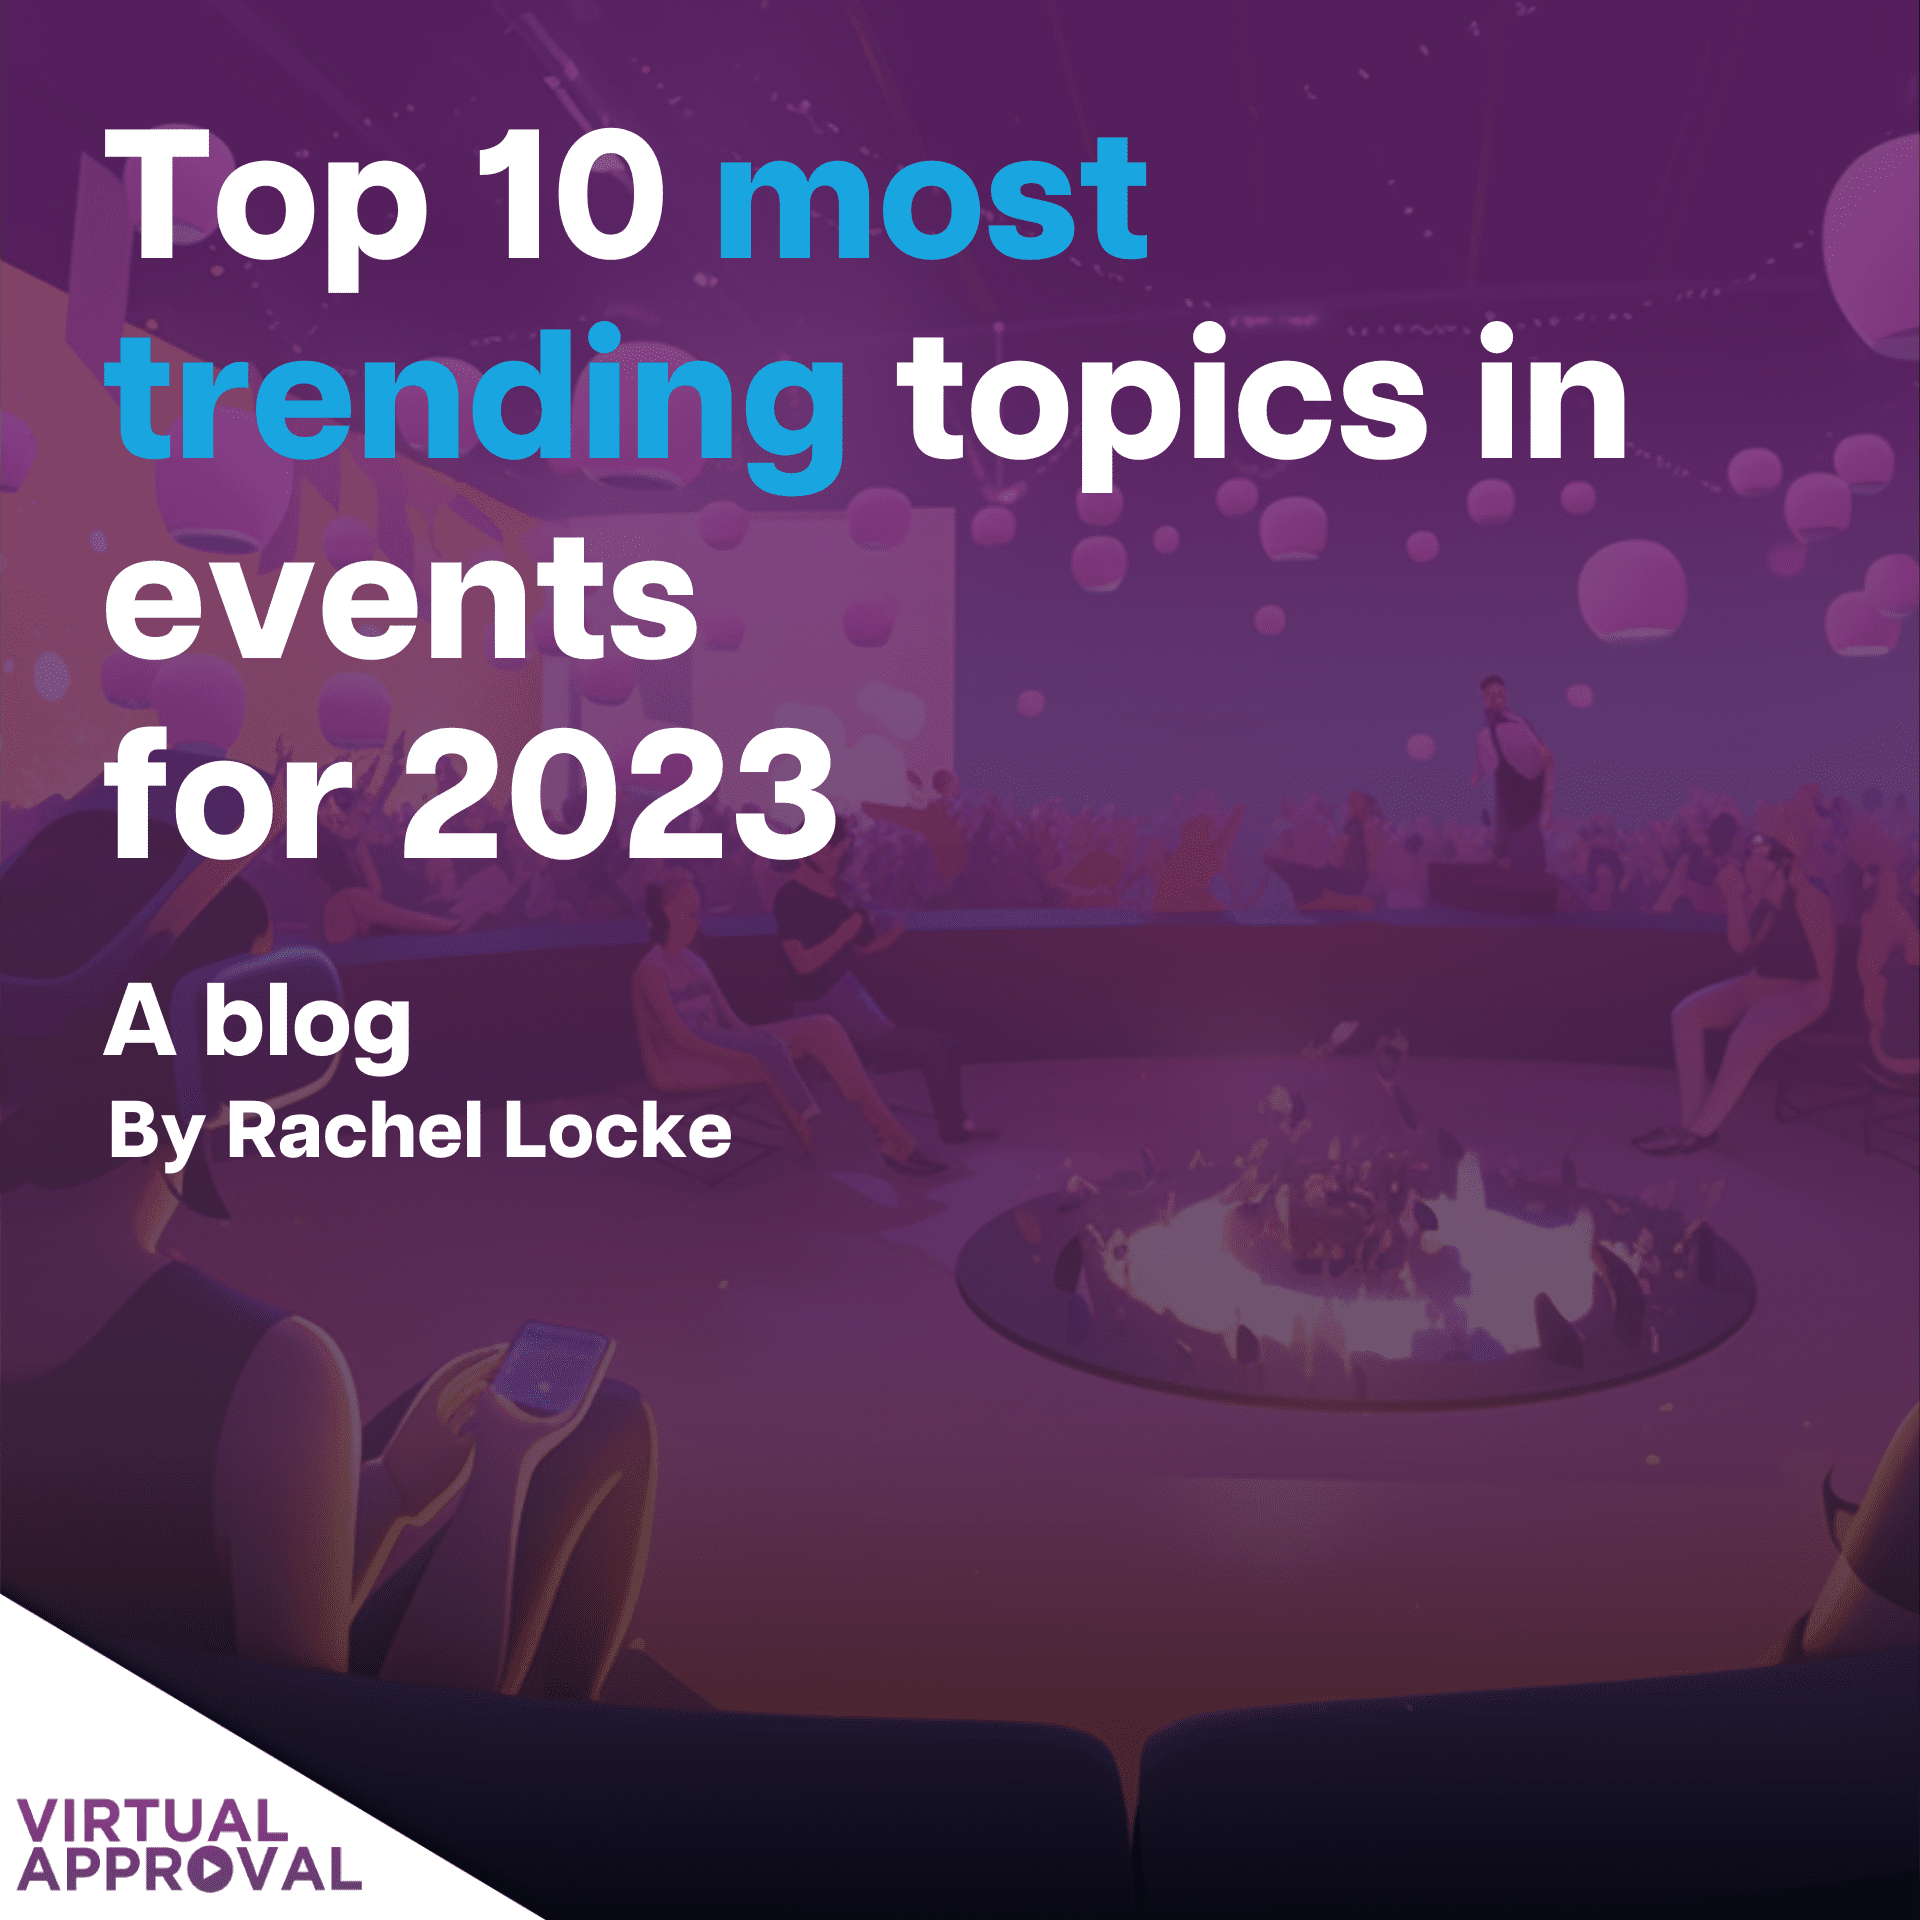 Top 10 Most Trending Topics In Events for 2023